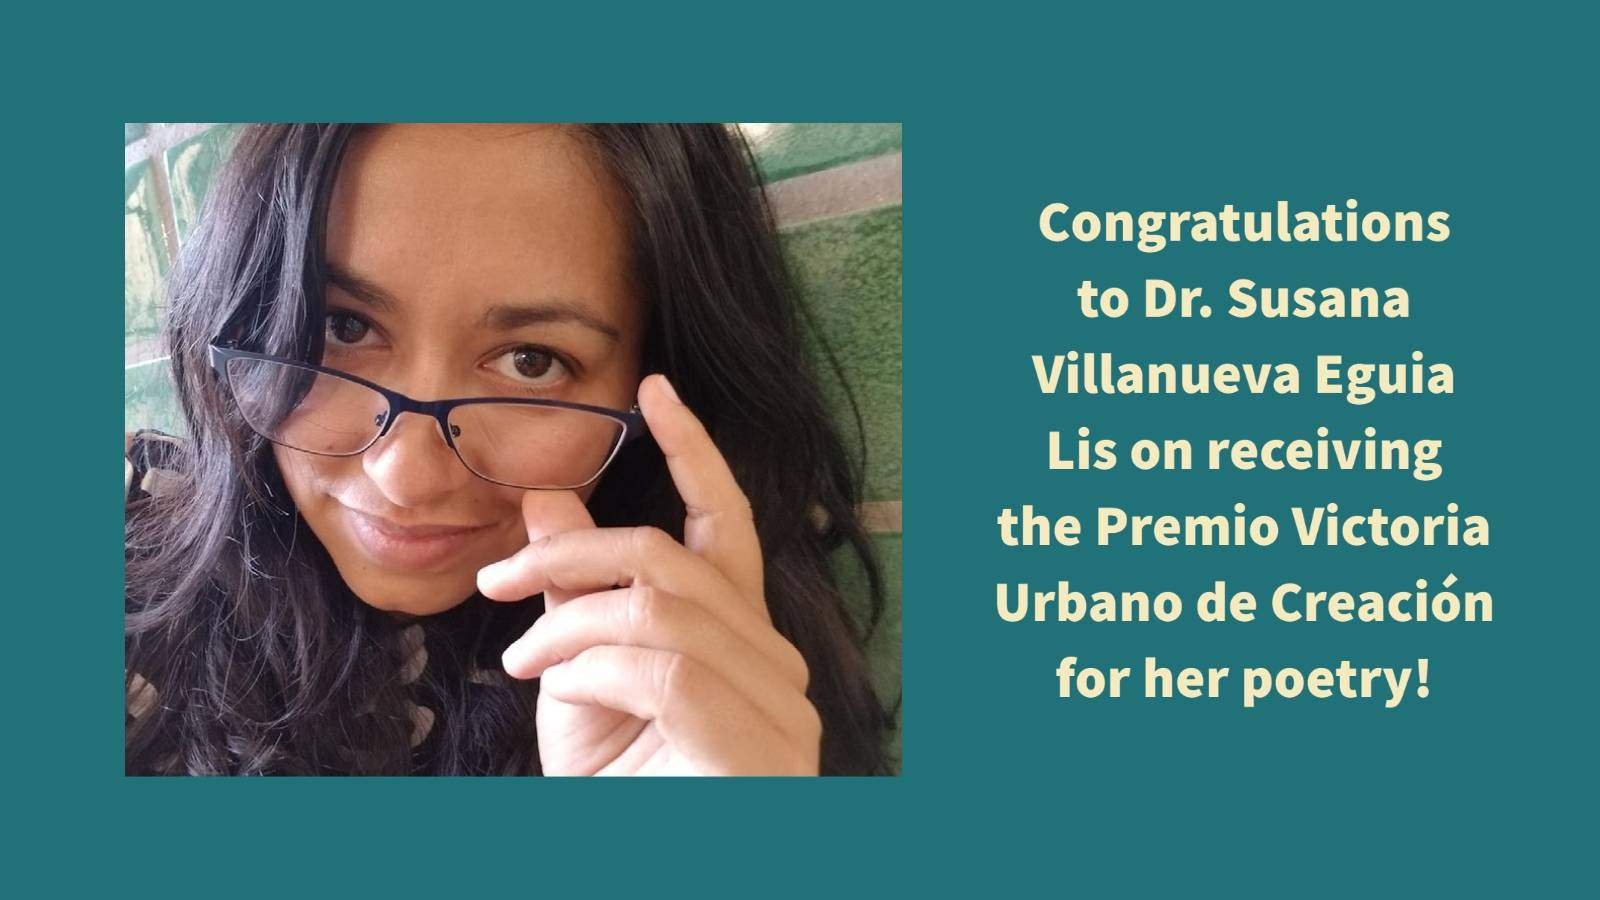 Image: woman wearing glasses pulled down slightly on the bridge of her nose. Text: The Department of World Languages and Literatures congratulates Dr. Susana Villanueva Eguia Lis, who was awarded the Premio Victoria Urbano de Creación for her poetry from the international Association of Gender and Sexuality Studies!